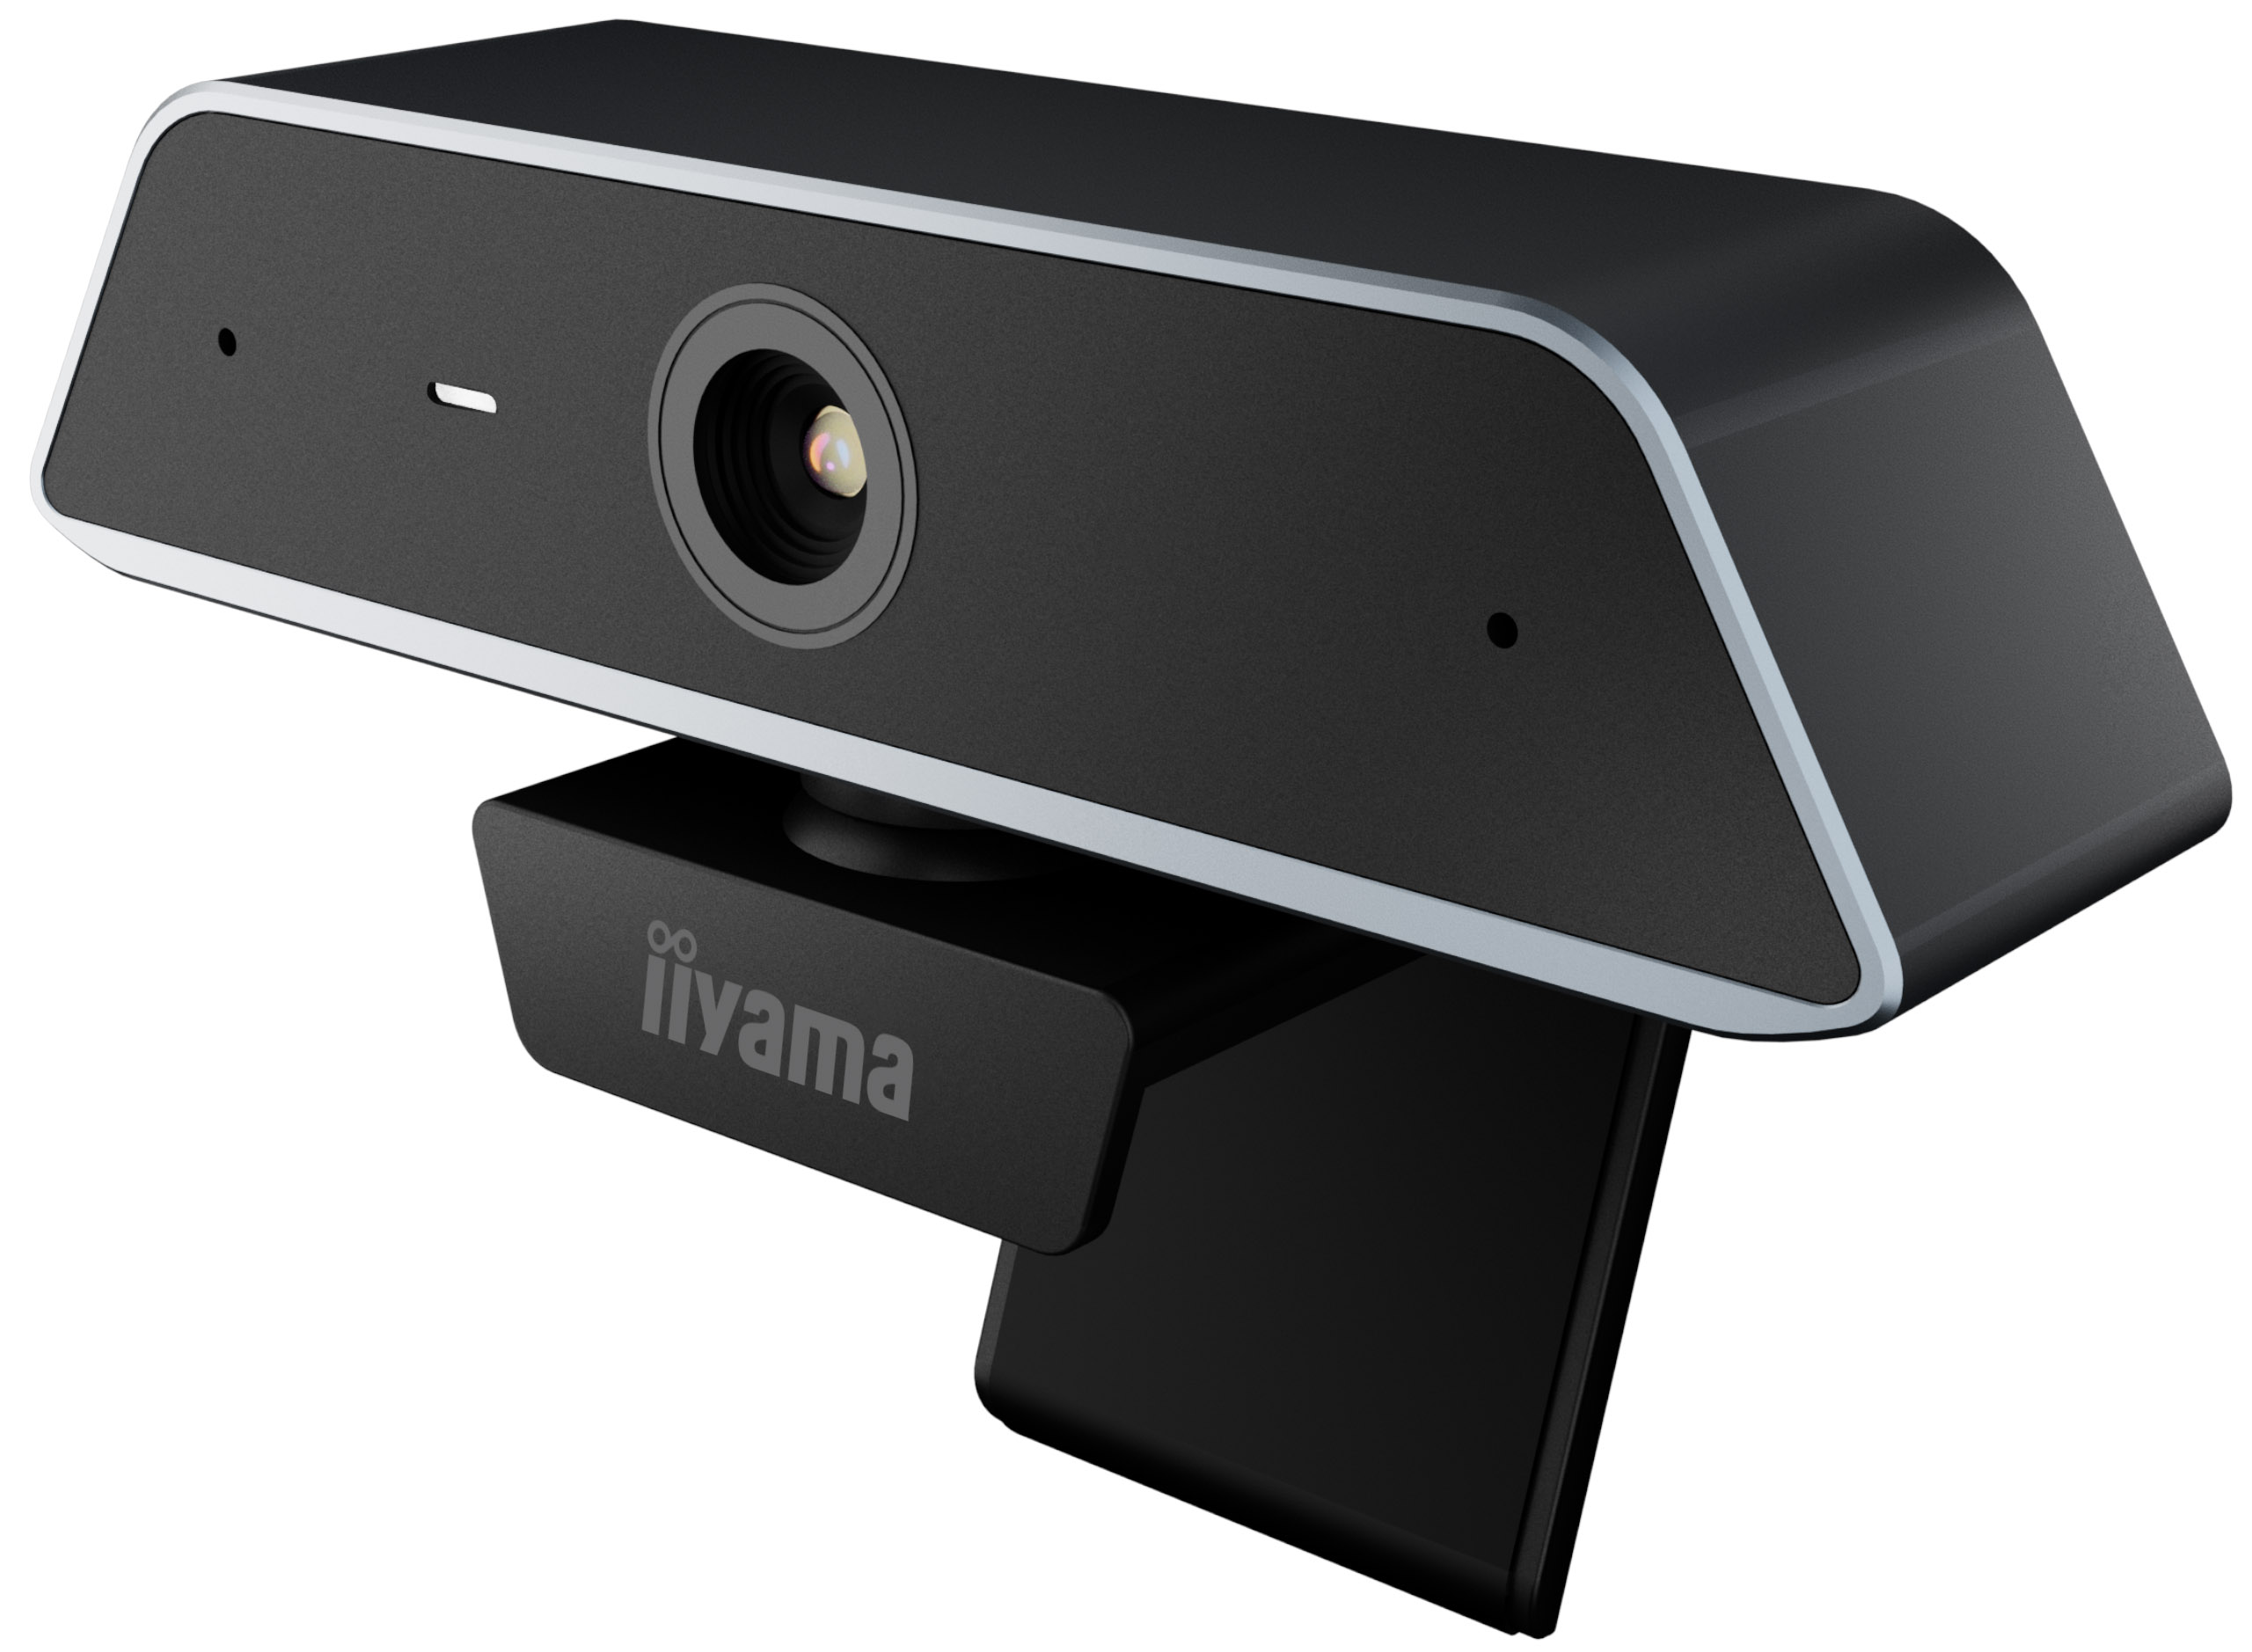 iiyama UC CAM80UM-1 - 4K huddle/conference webcam - 13MP - USB camera with microphone - 80° field of view - auto focus - small rooms